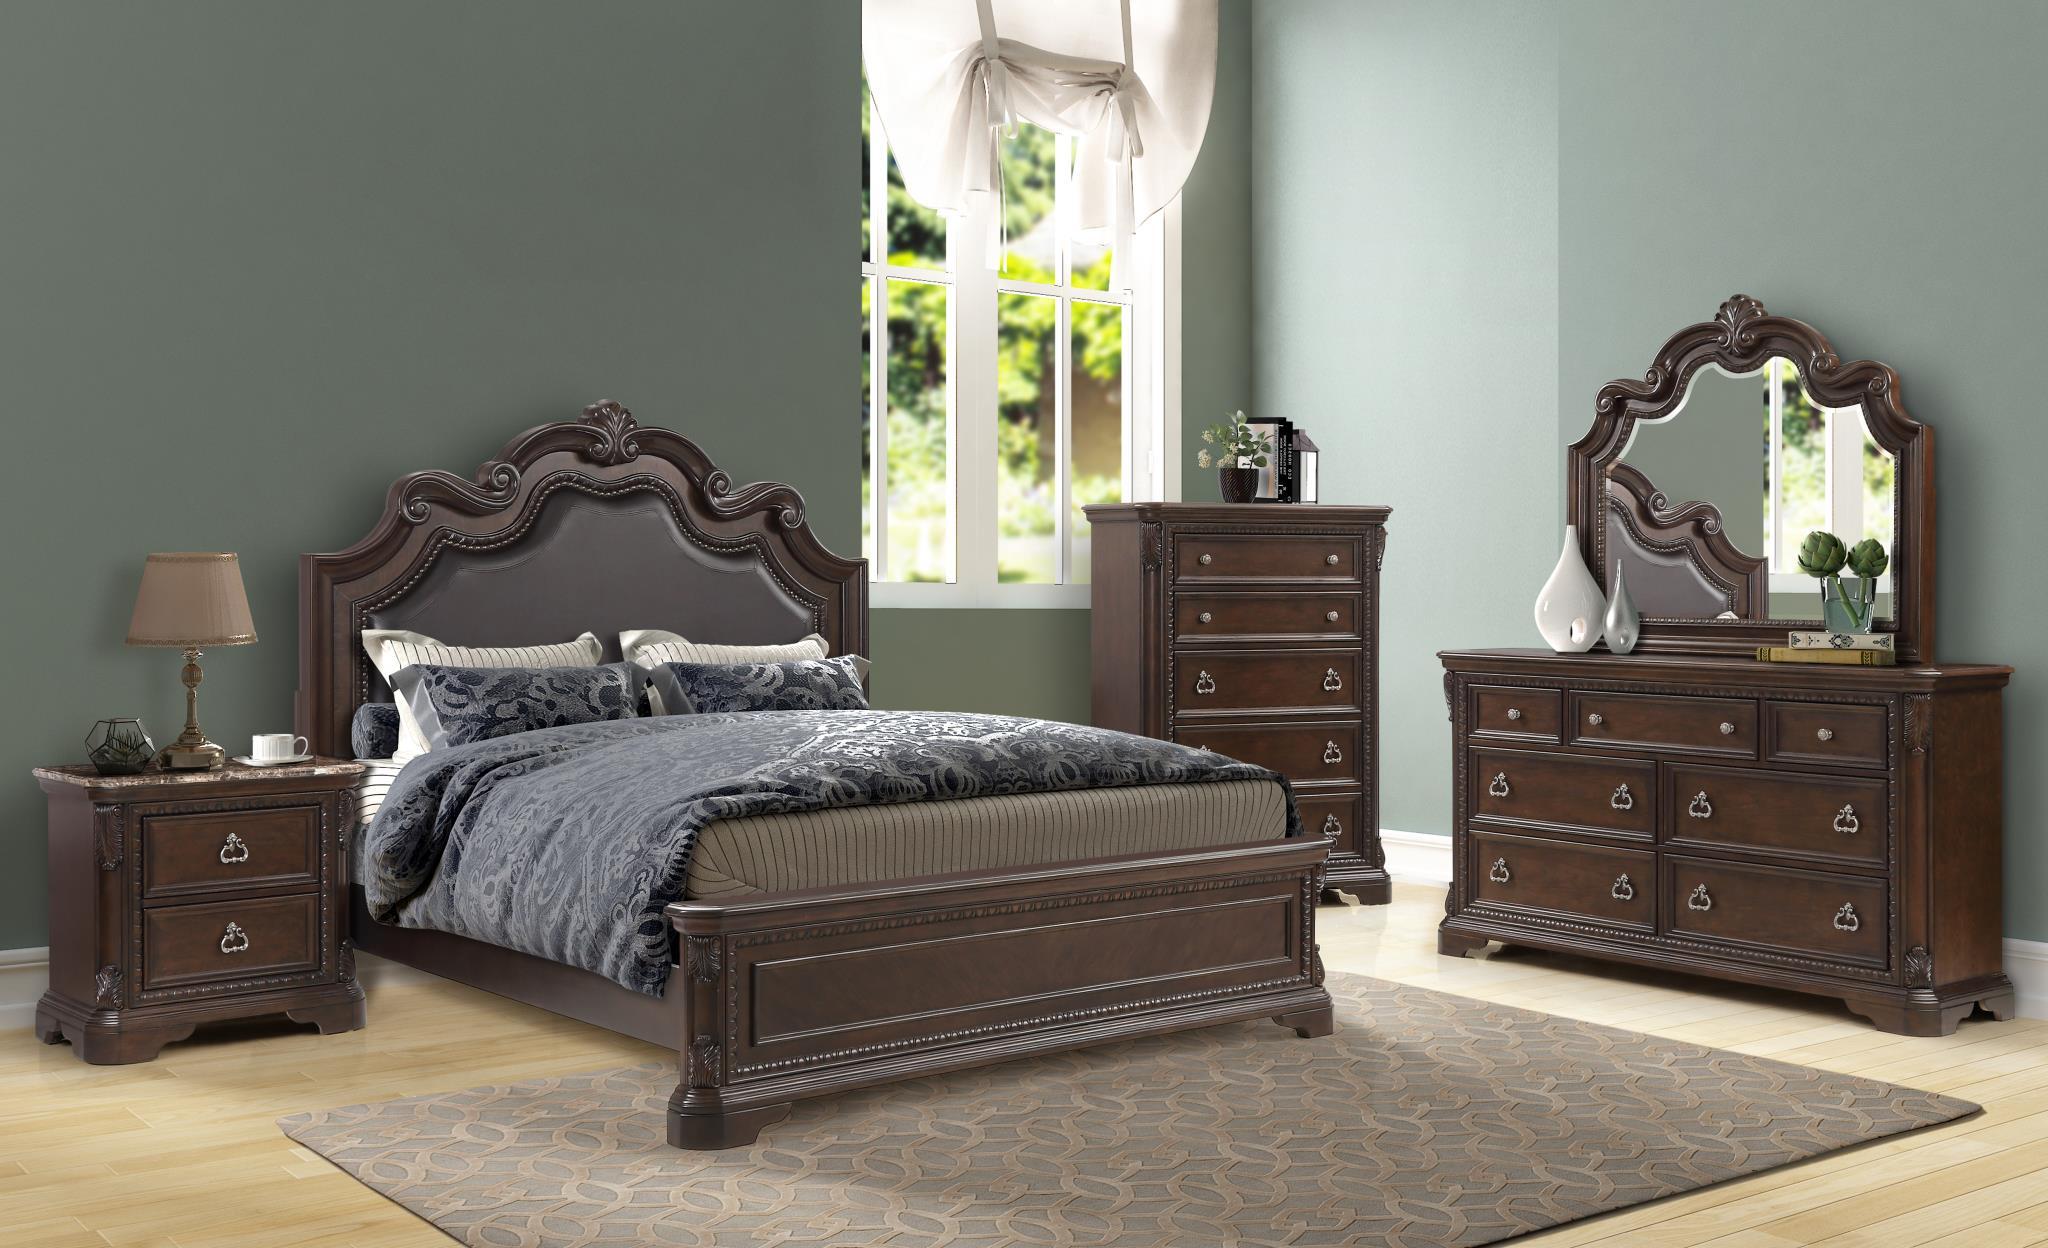 Modern, Transitional Panel Bedroom Set COVENTRY 1988-107-Set-6 1988-107-2NDMC-6PC in Mahogany Bonded Leather